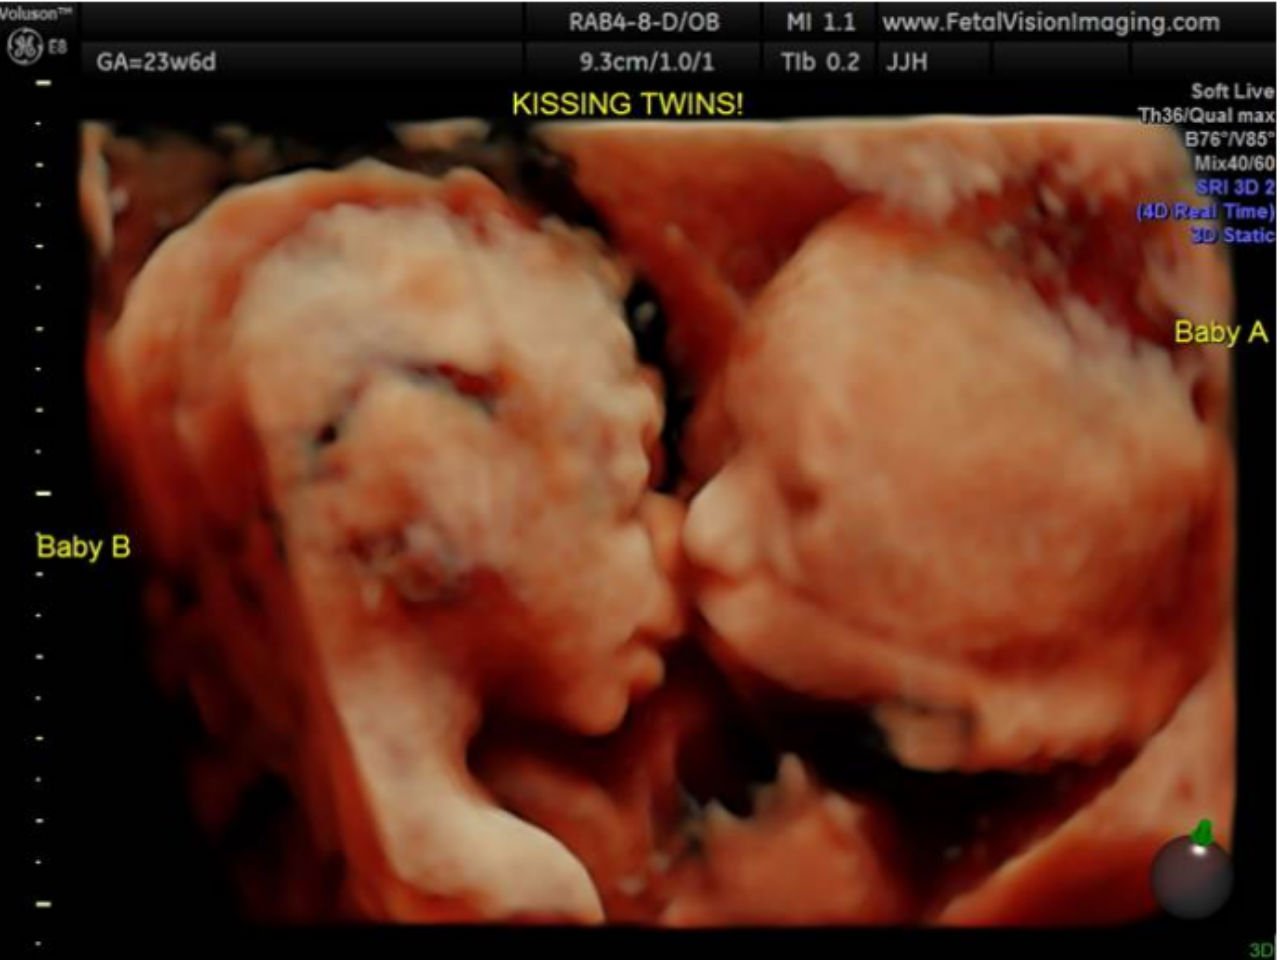 ultrasound image of twins kissing in the womb